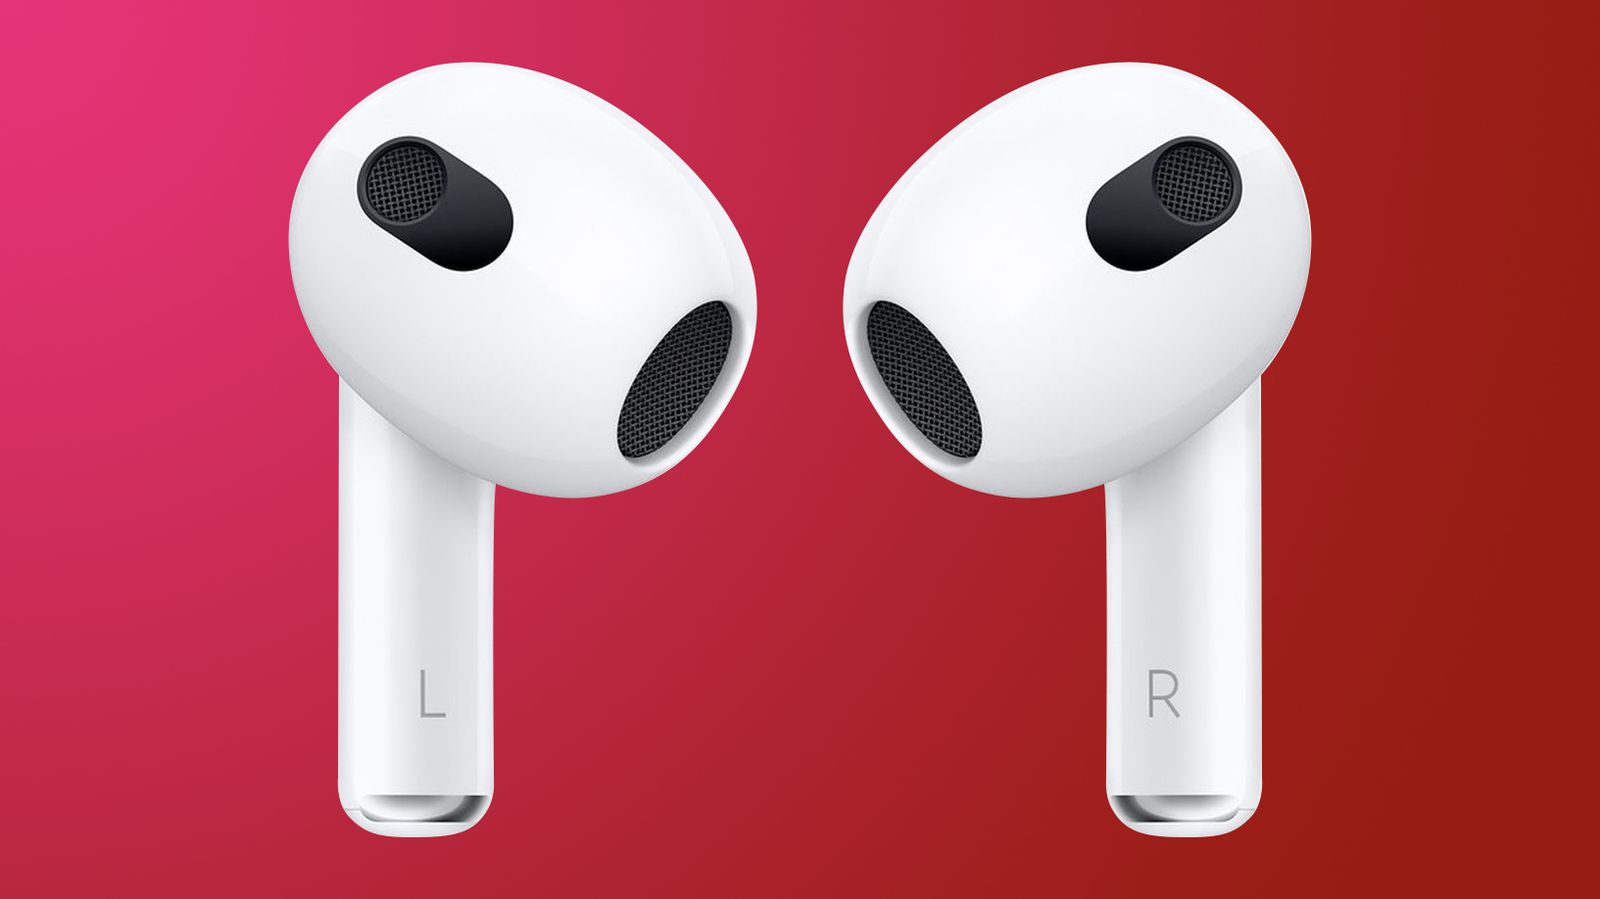 Apple $549 AirPods Max Headphones Review: Sound Quality, Noise Cancellation  - Bloomberg